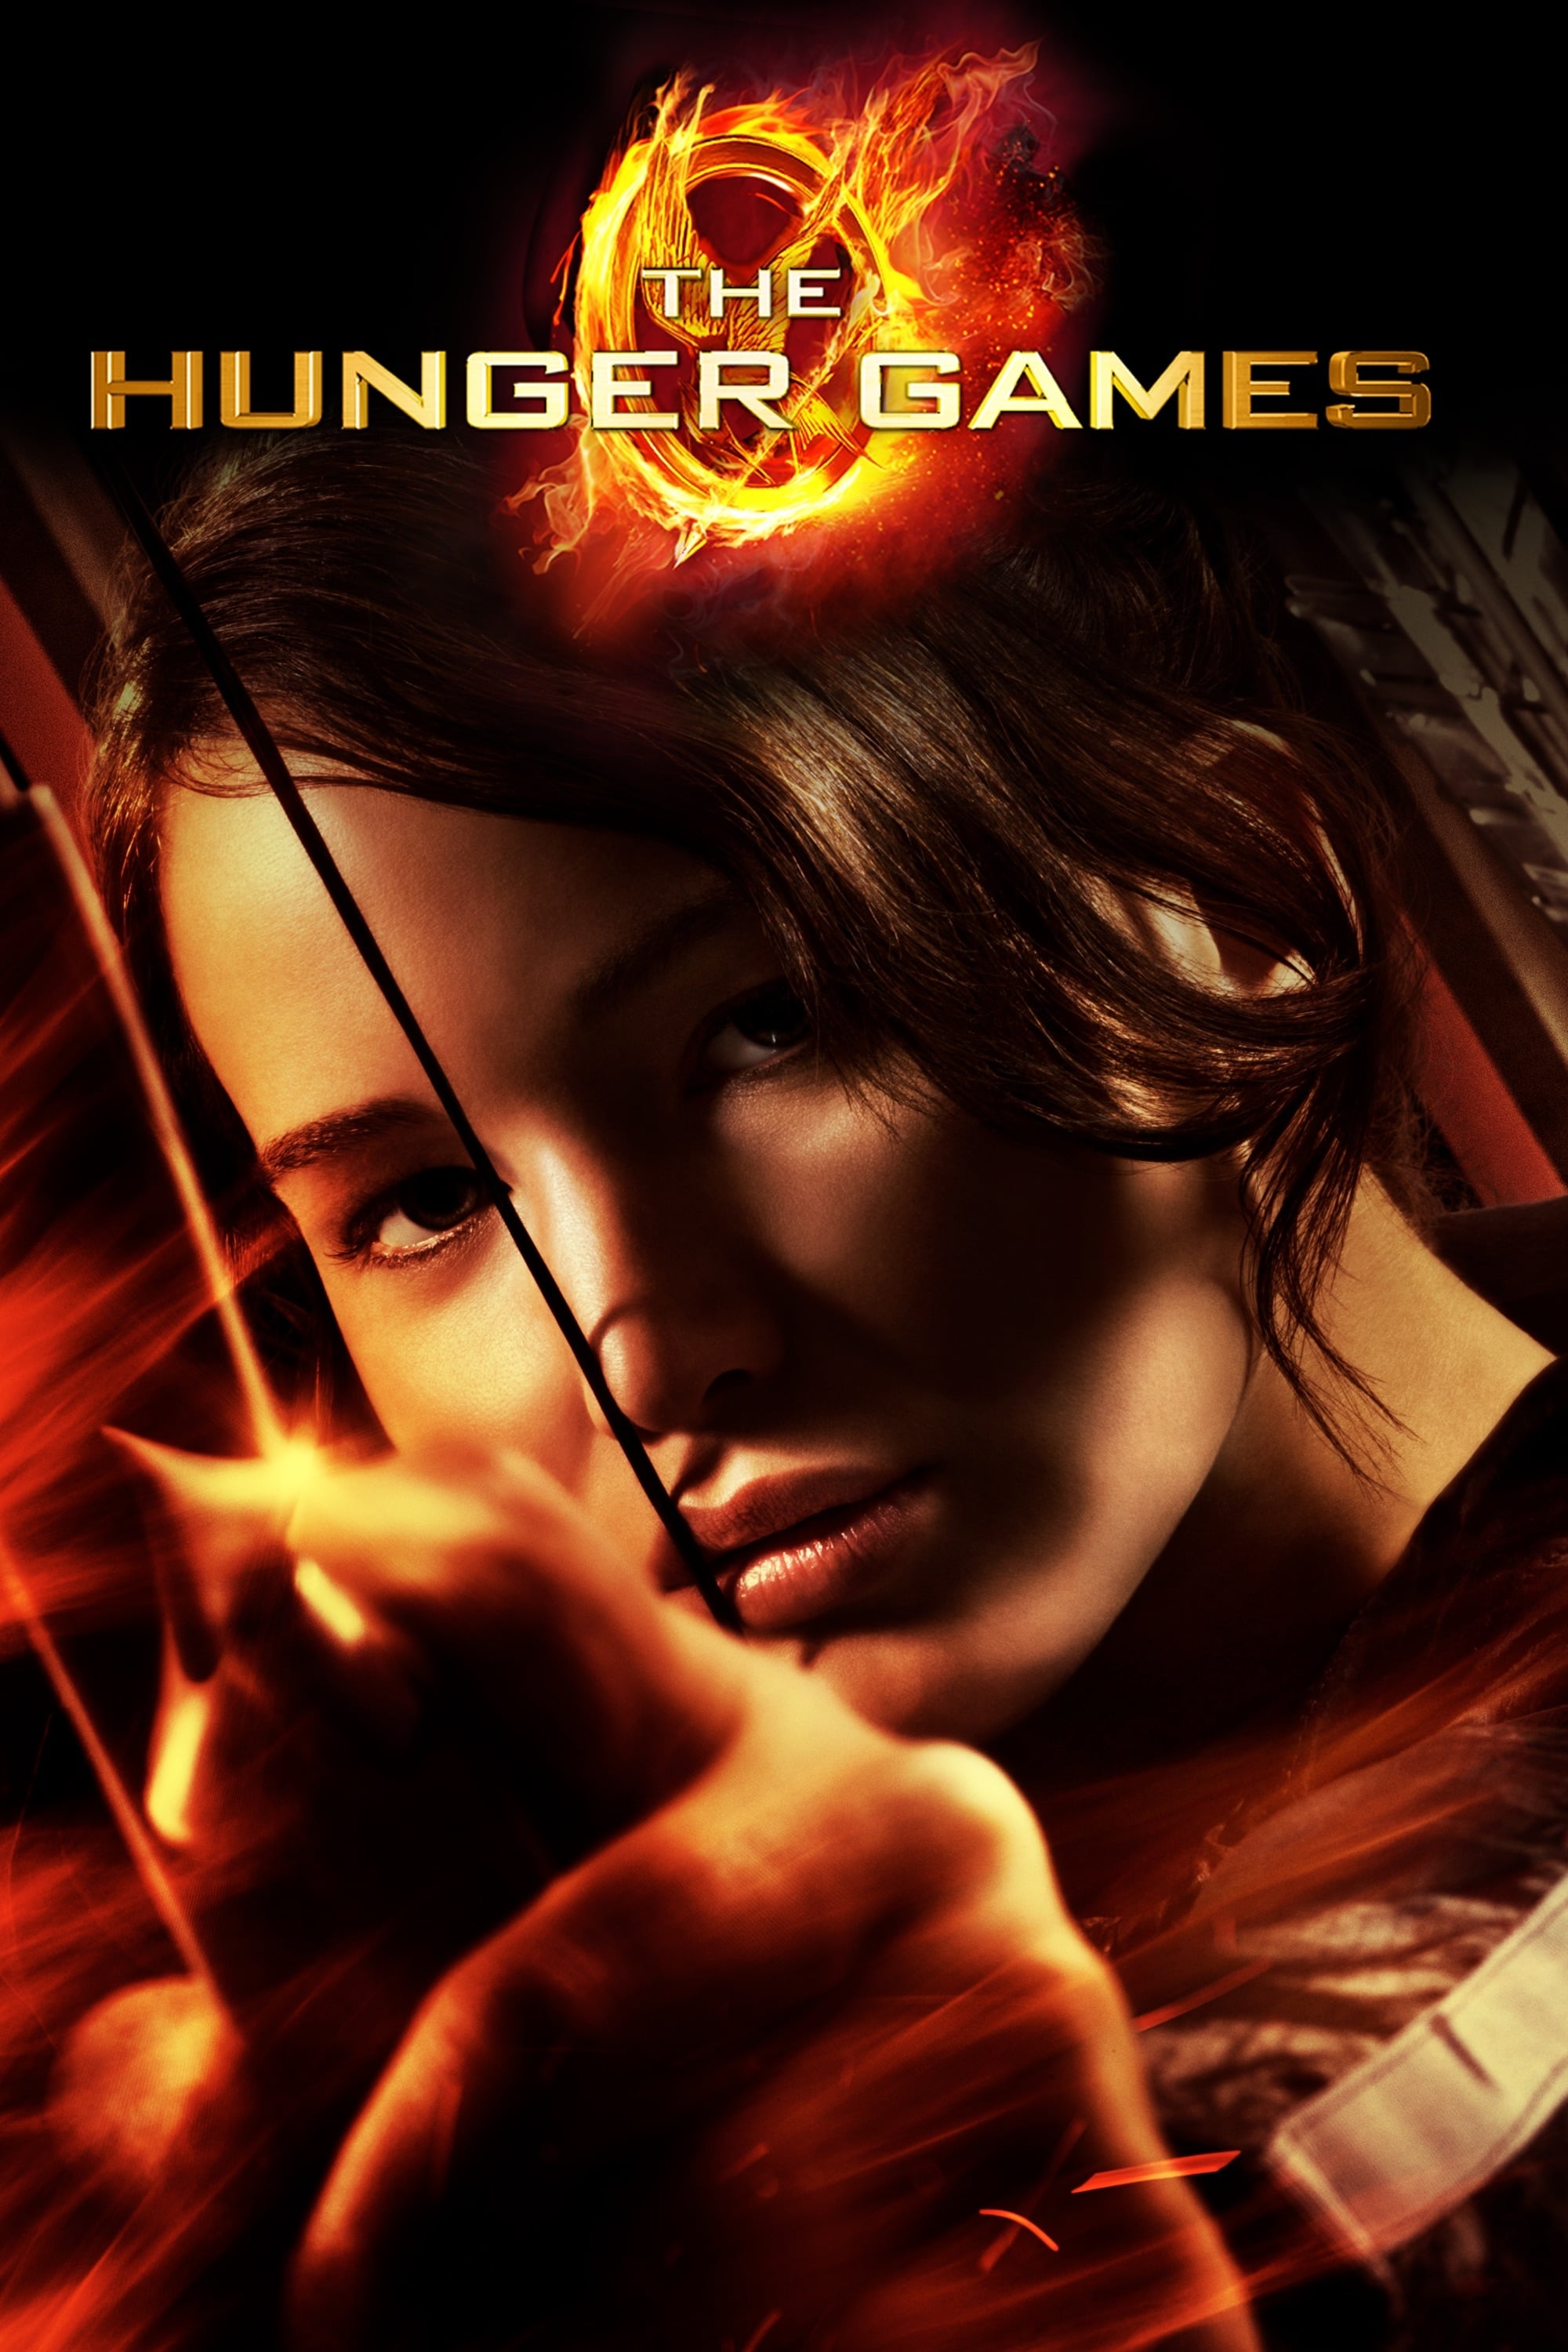 where can i download the hunger games movie